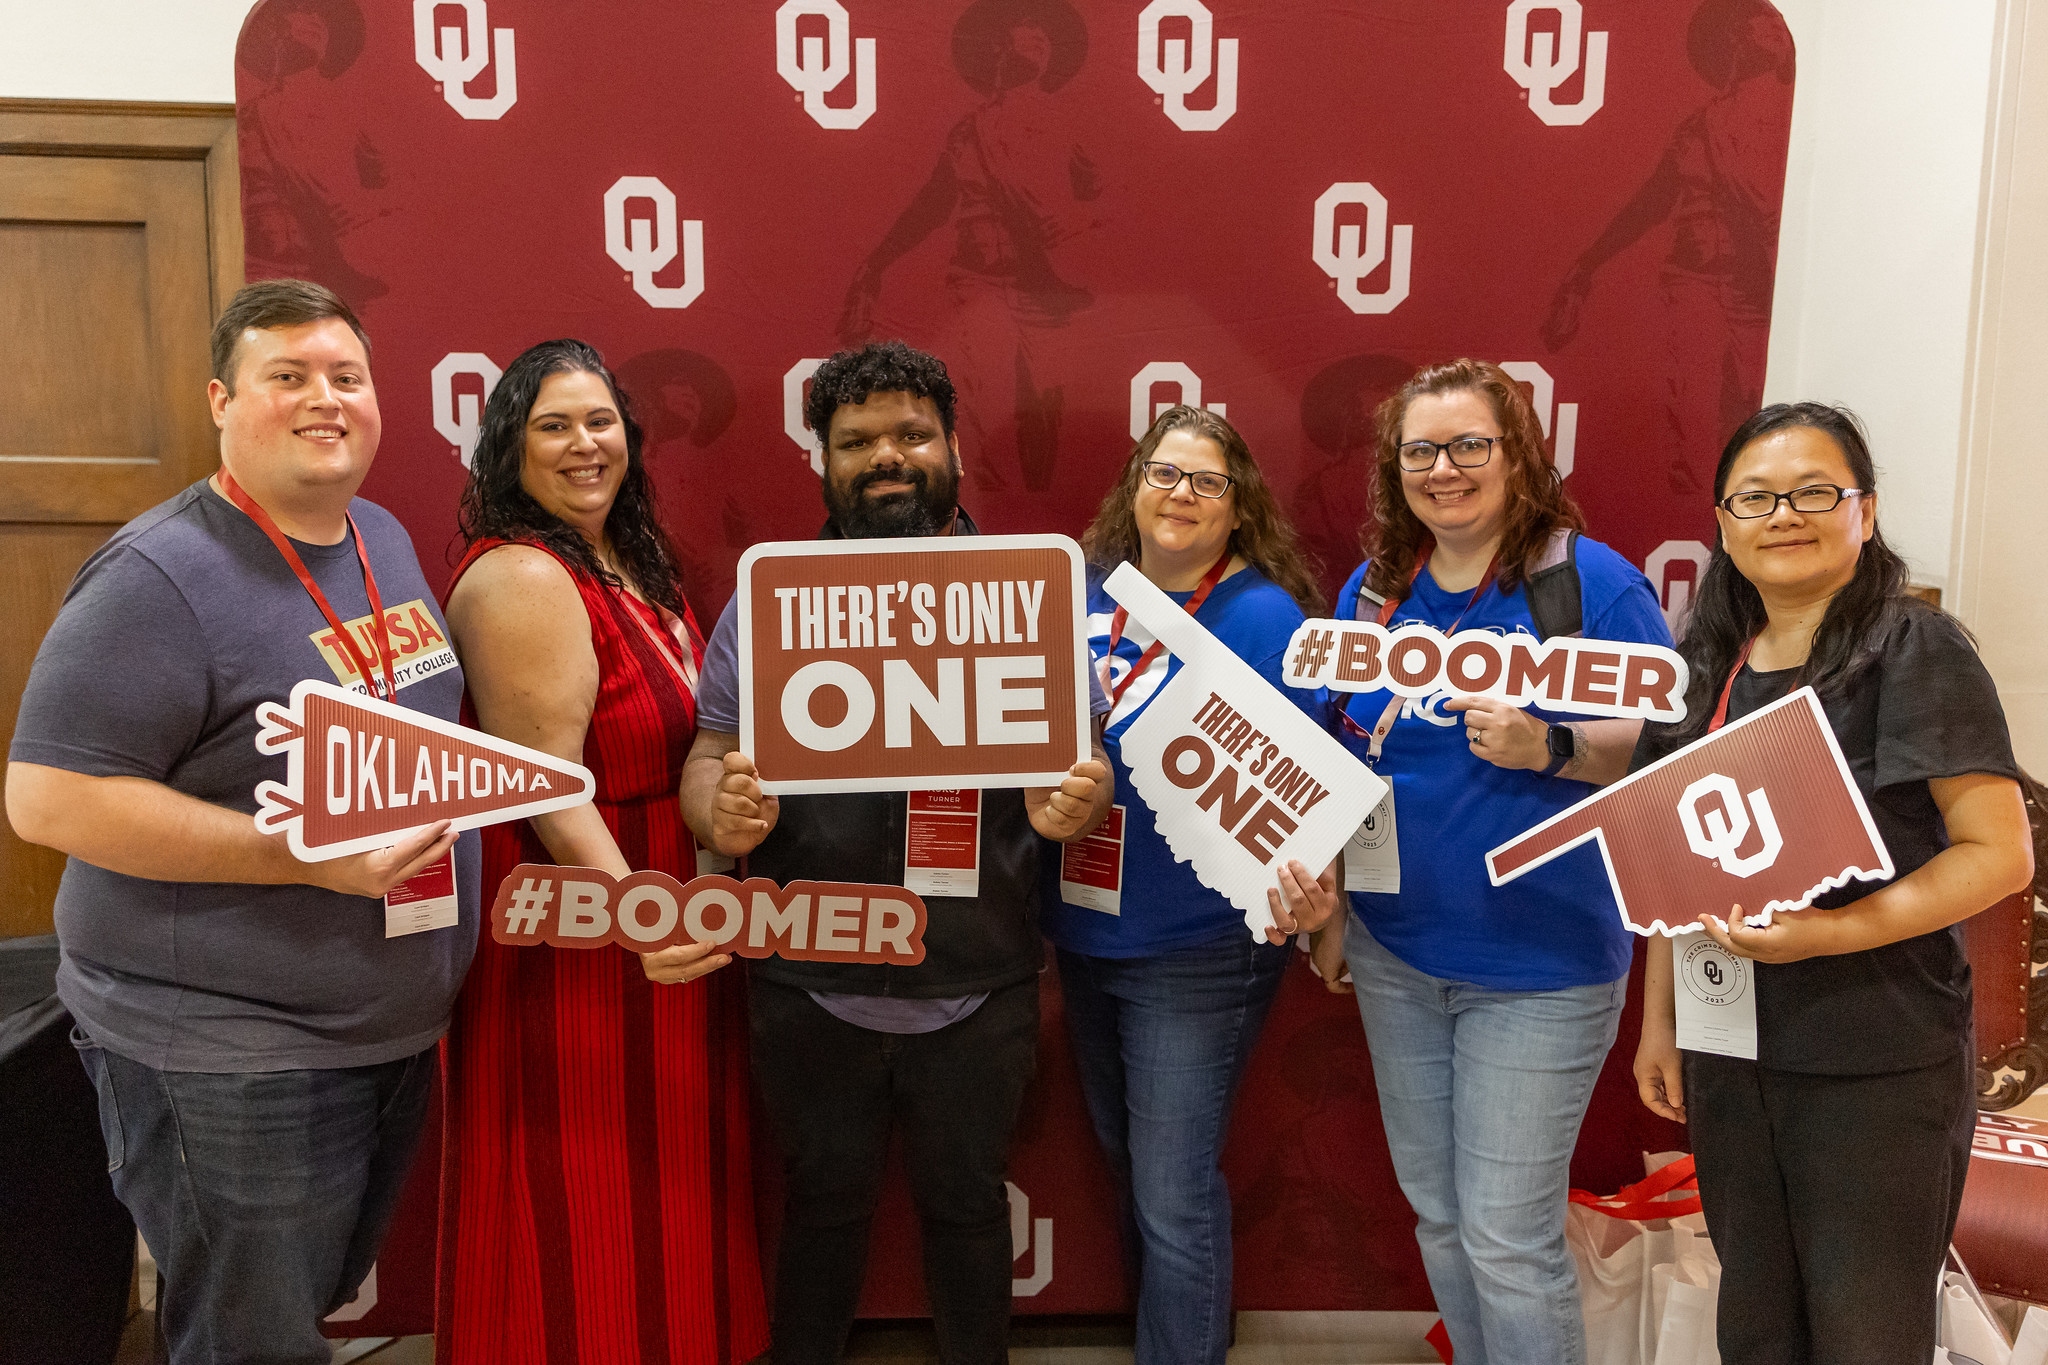 Six people standing looking in front and showing OU banners.